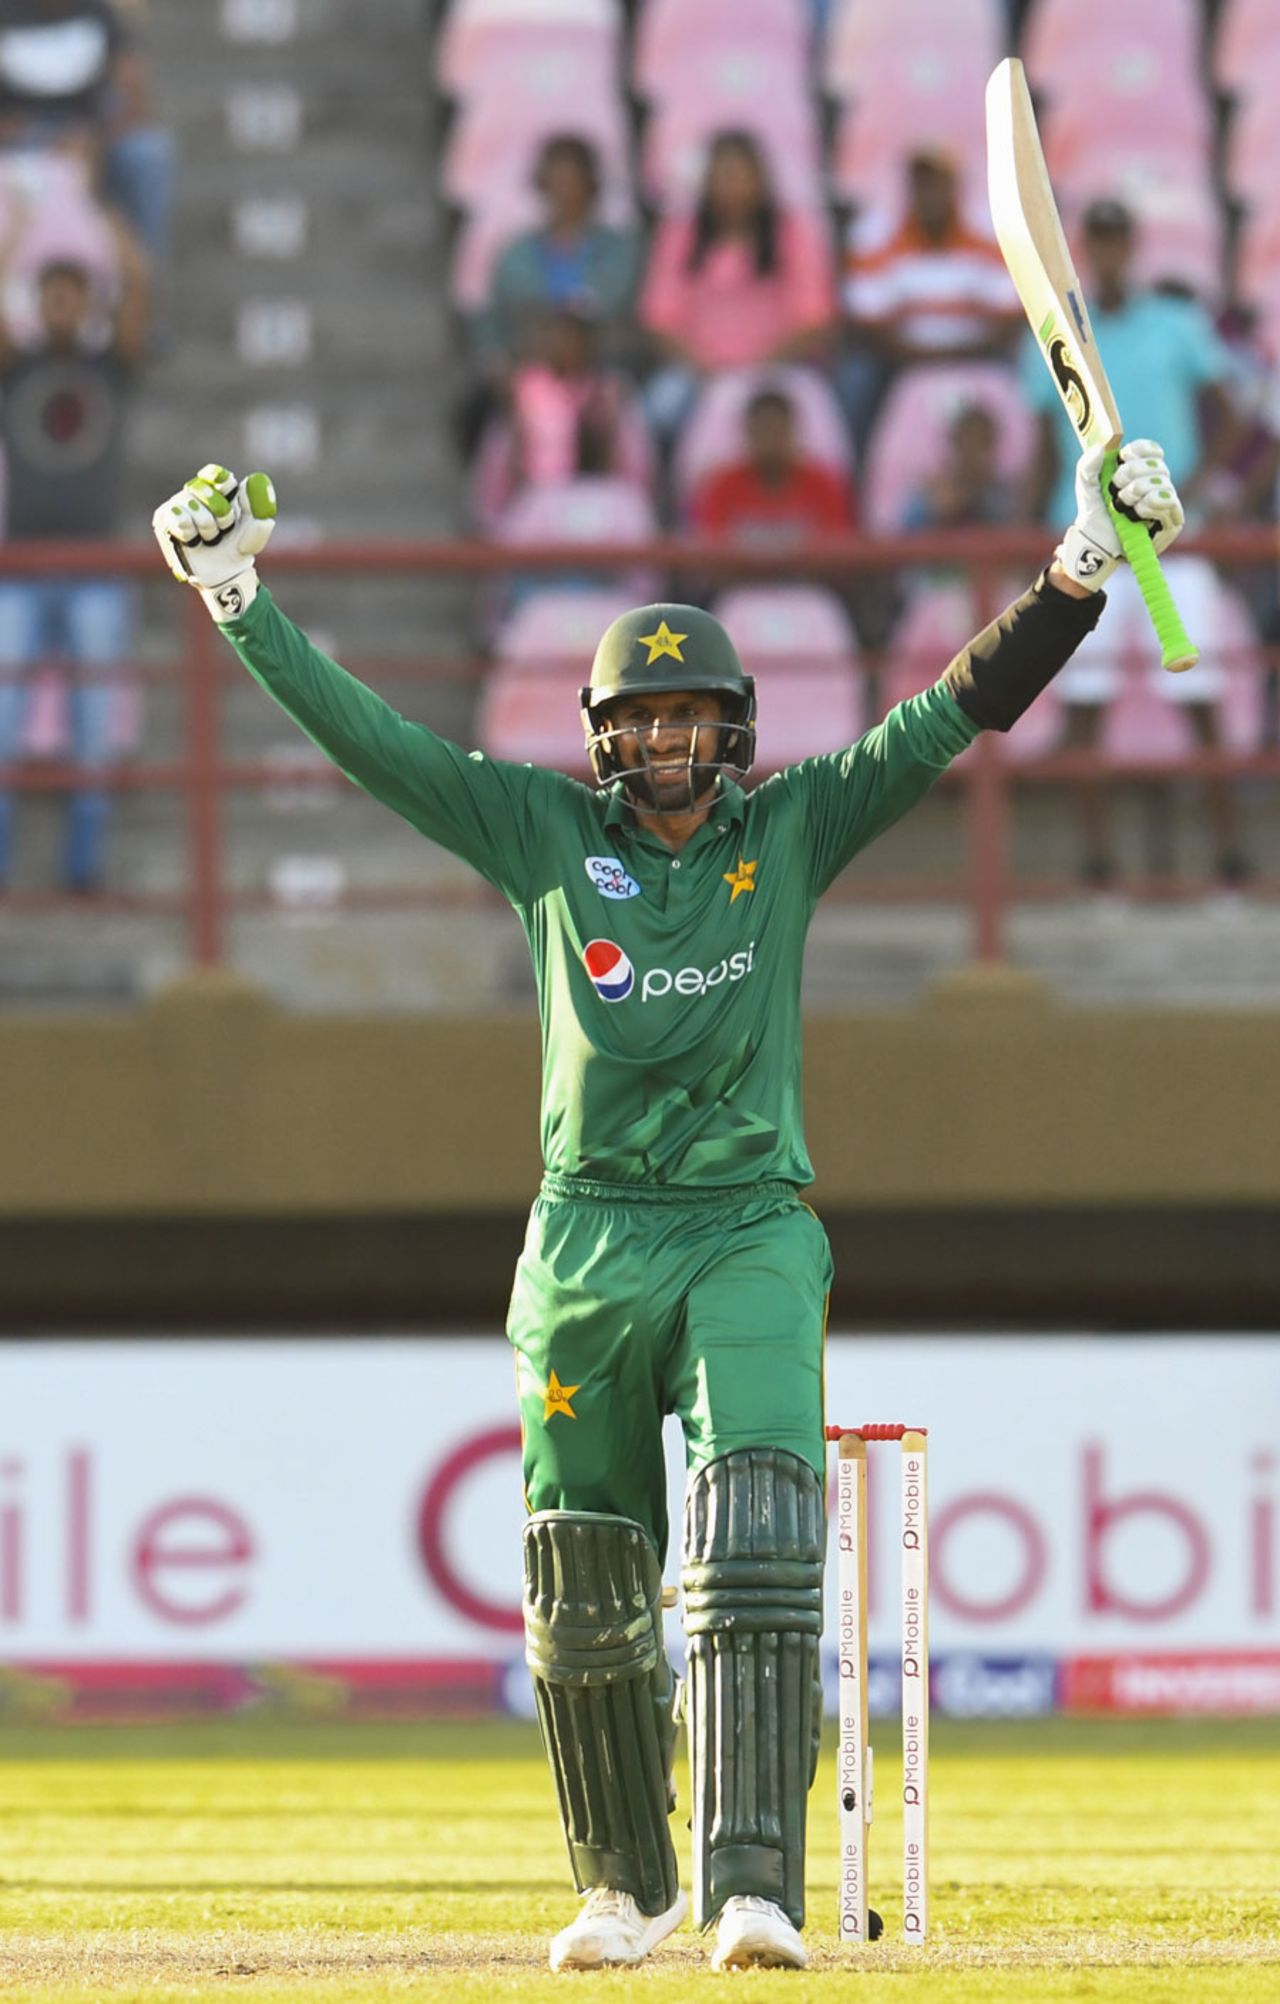 Shoaib Malik went to his hundred with a six from the final ball of the chase, West Indies v Pakistan, 3rd ODI, Providence, April 11, 2017